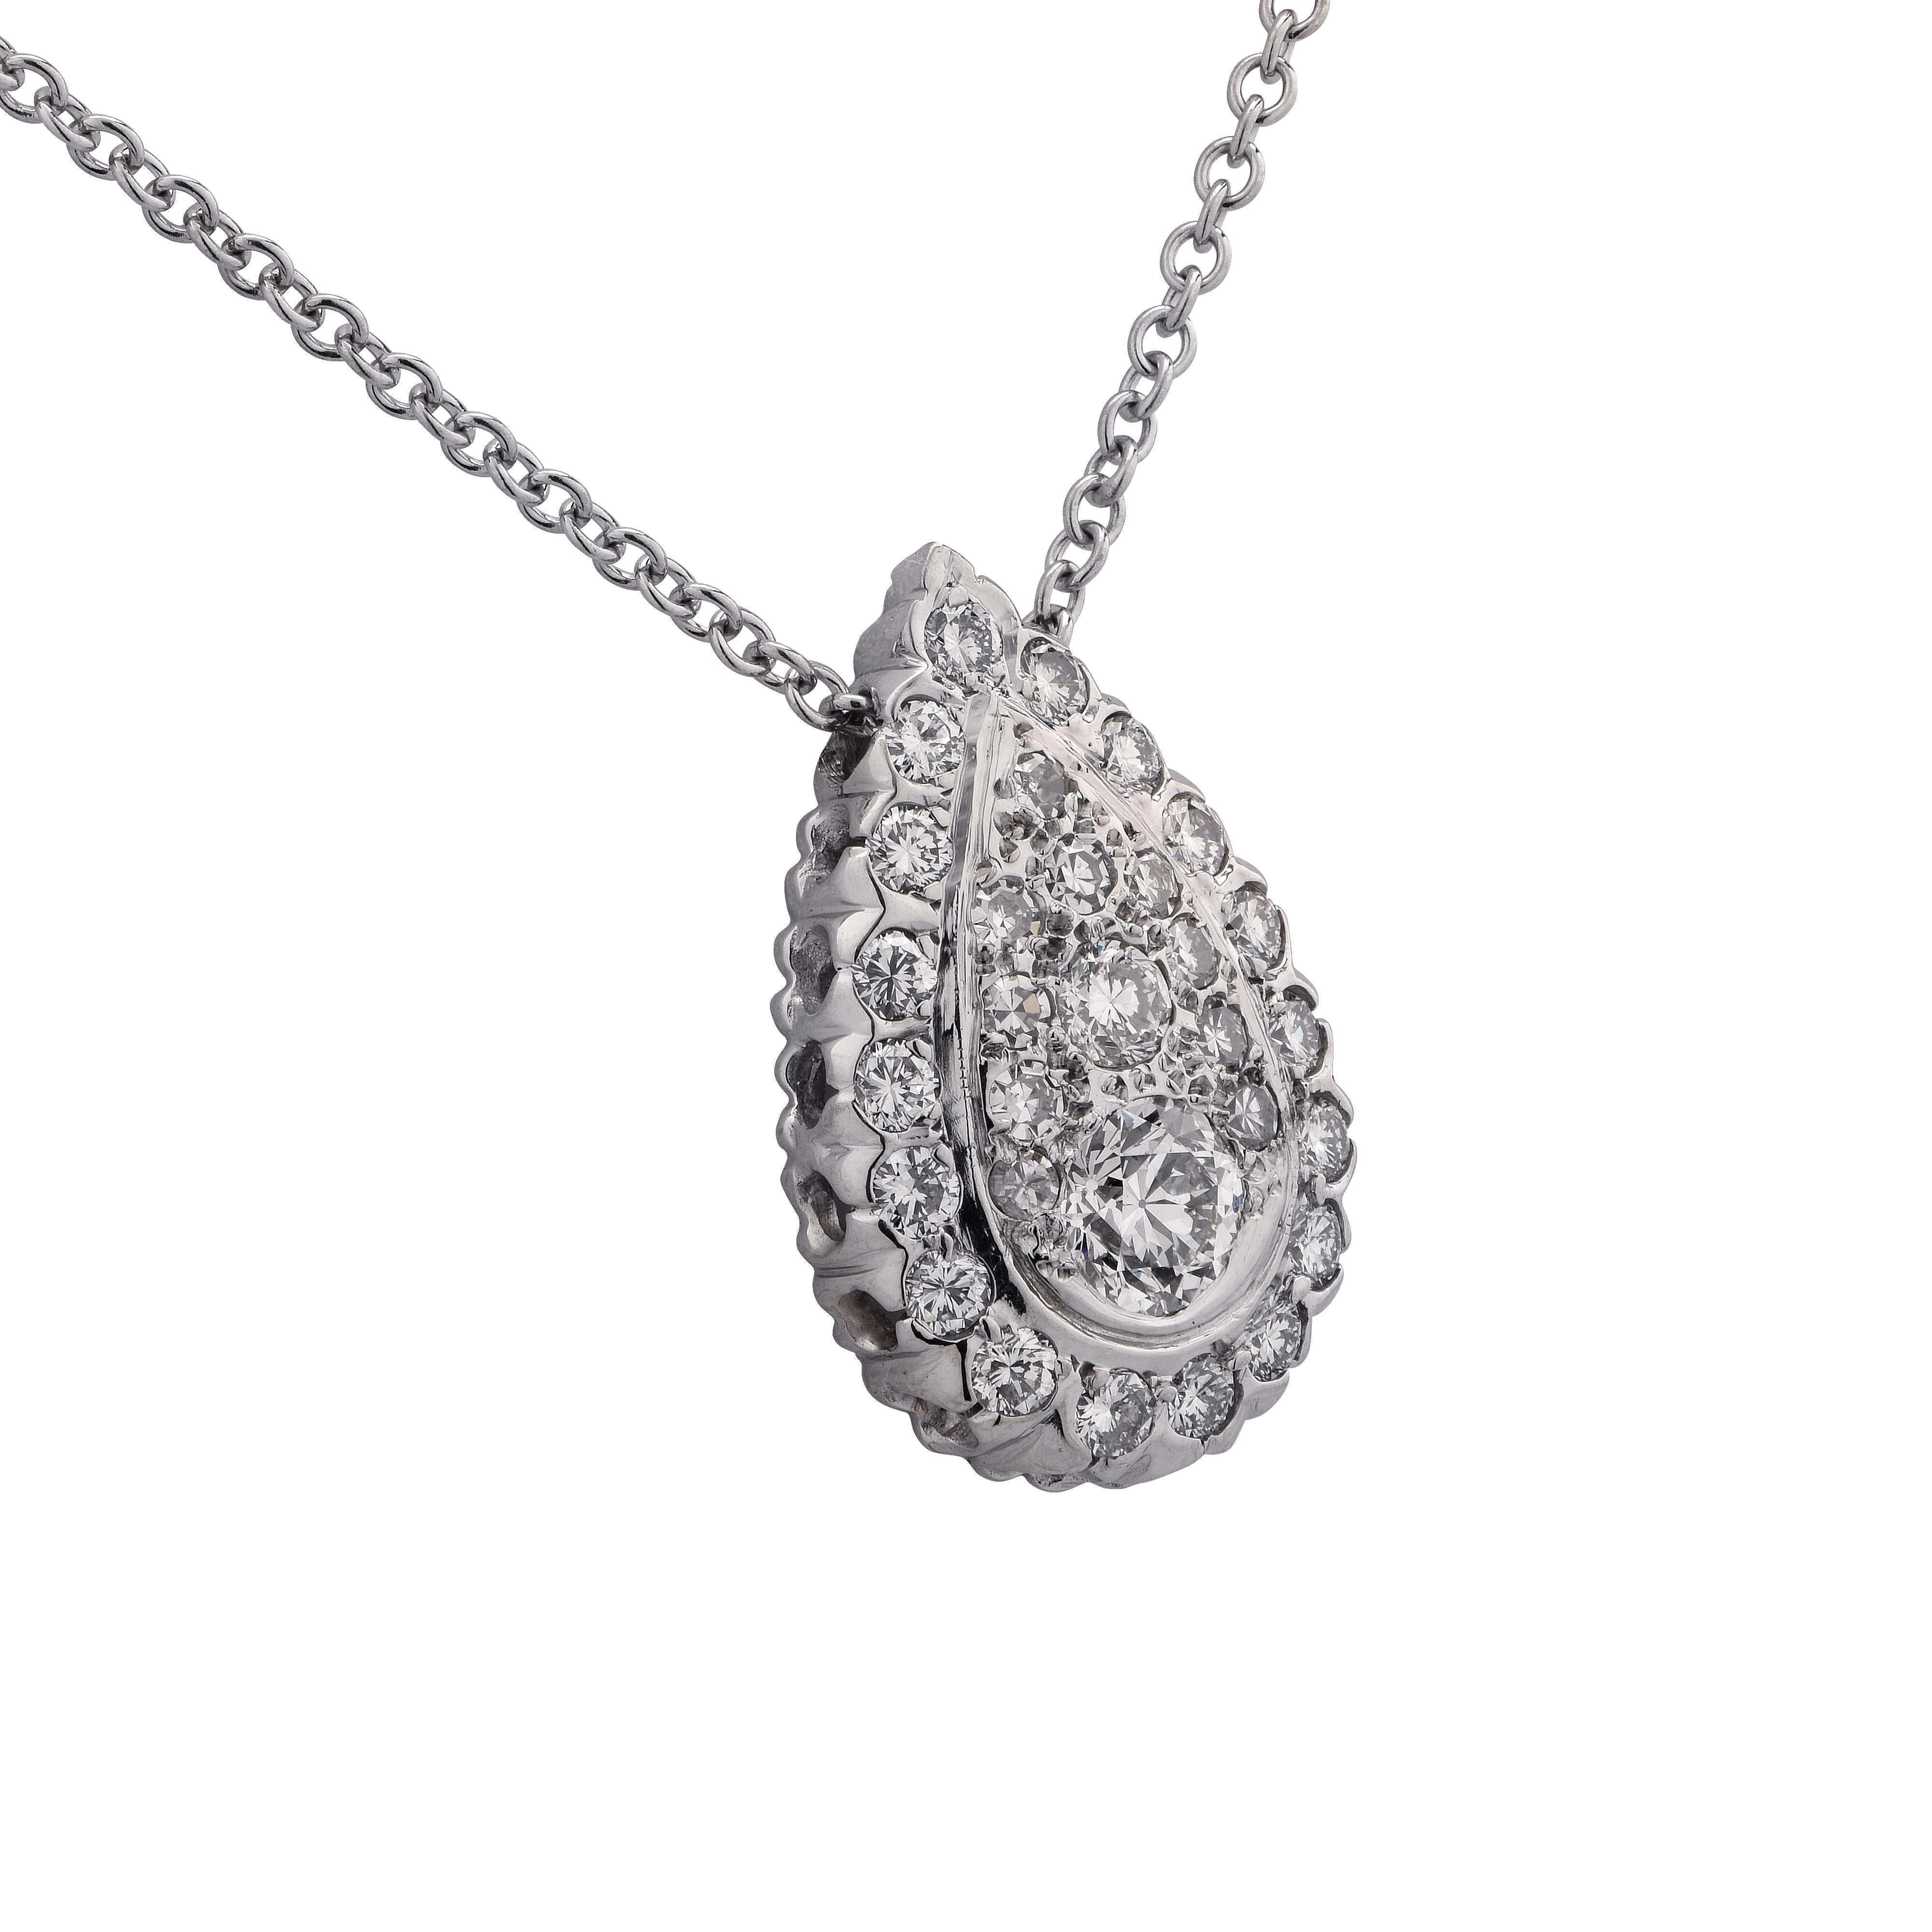 18K white gold necklace featuring a .70ct round brilliant cut diamond F color and VS clarity, surrounded by 29 round brilliant and single cut diamonds F color VS clarity set in a cluster pear motif. This beautiful necklace measures 1 inch long and